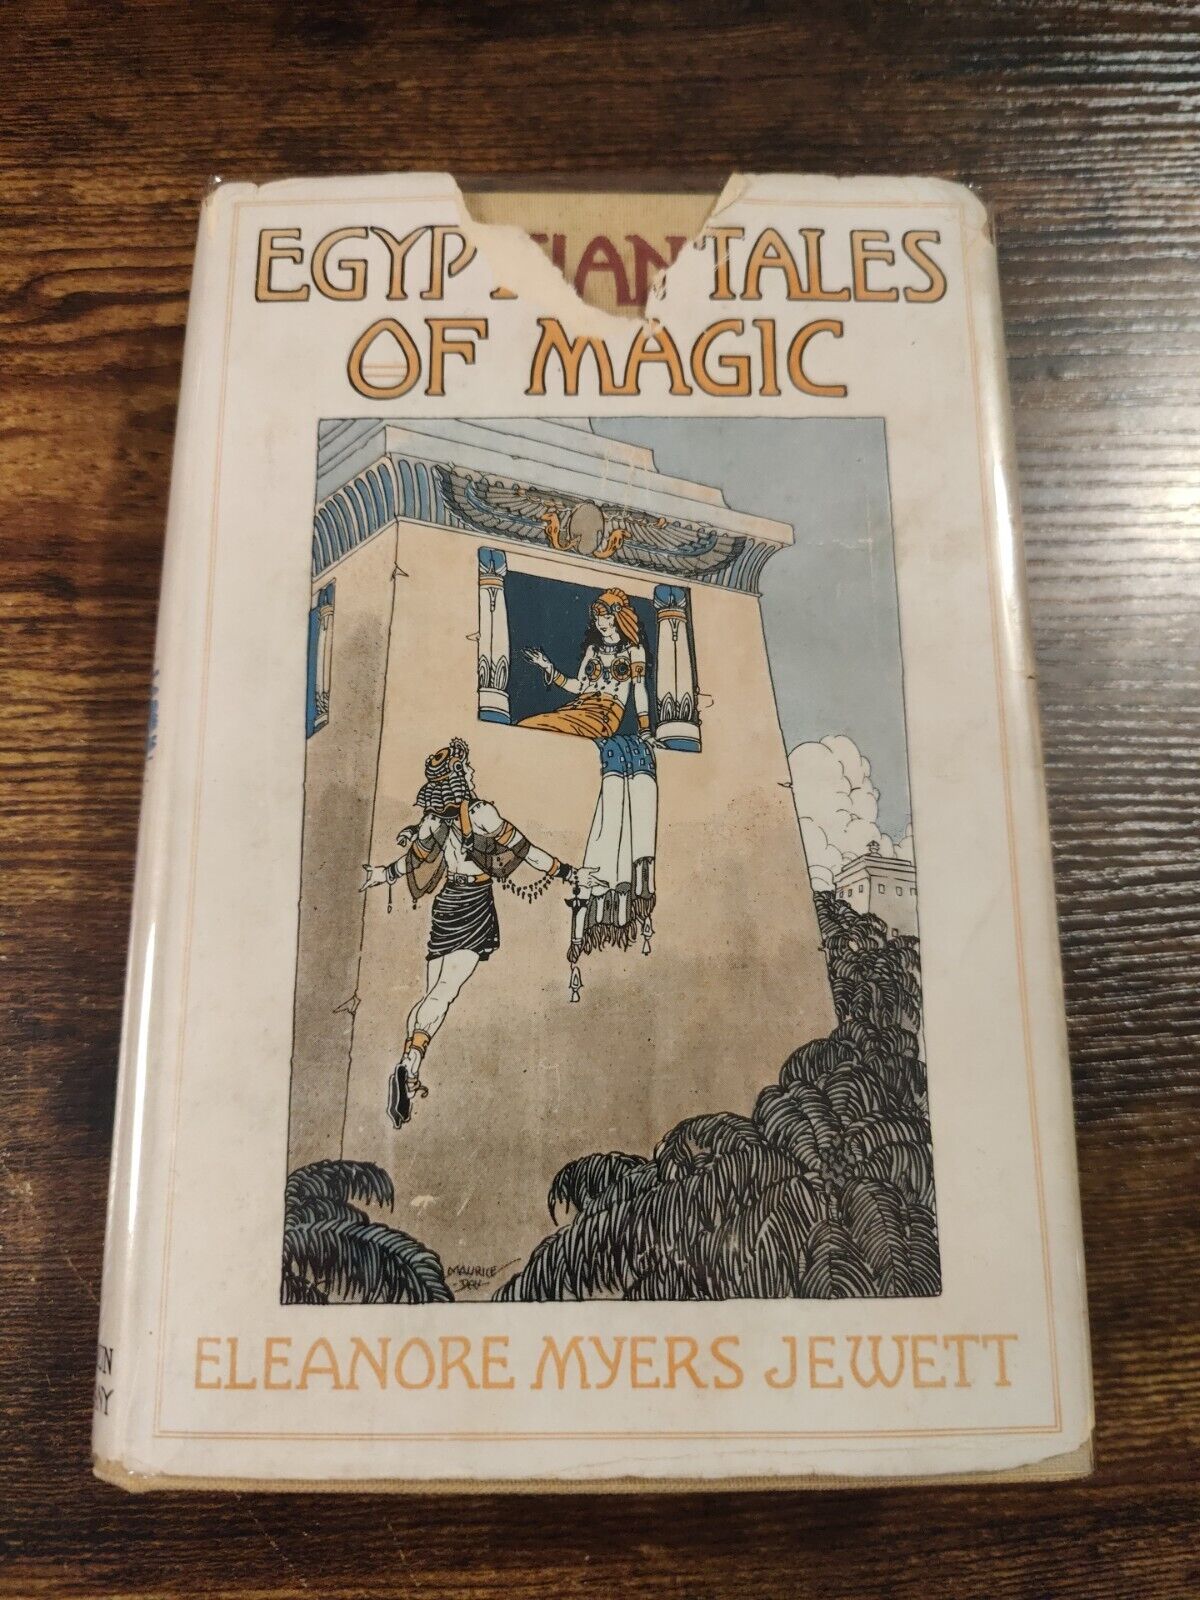 1924 Vintage Book: Egyptian Tales Of Magic By Eleanor Jewett